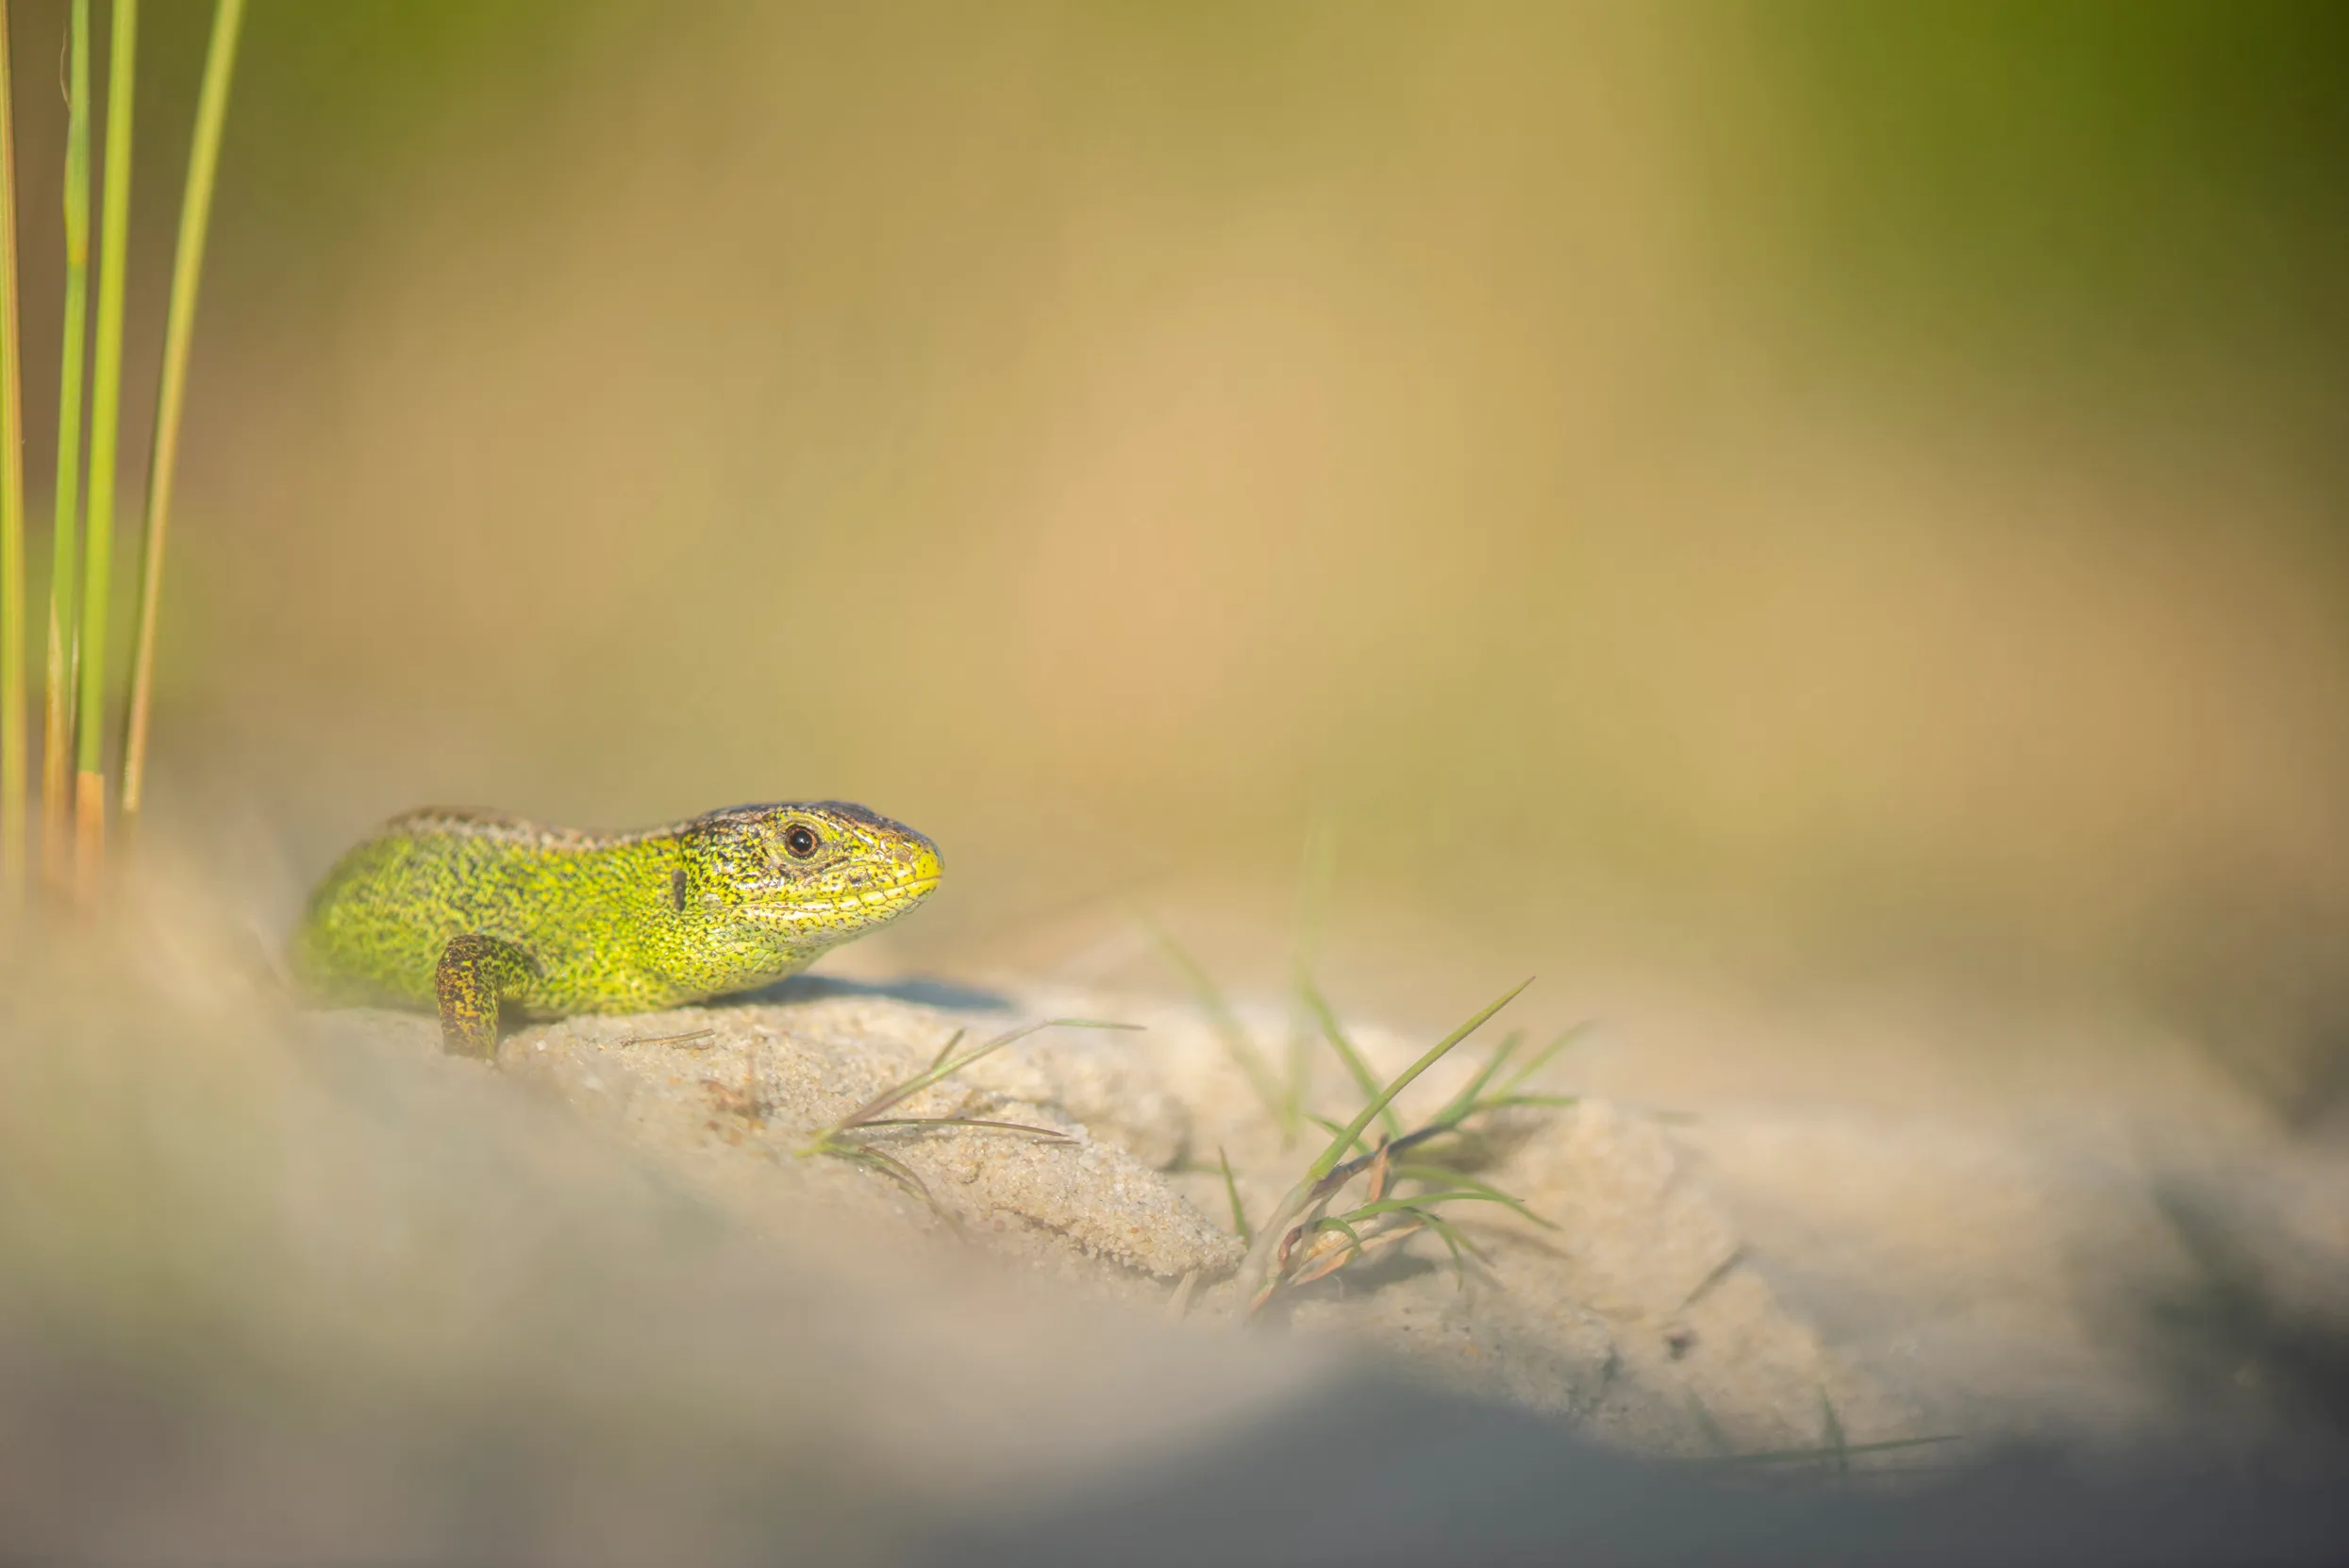 A Sand Lizard laying in sand with small pieces of grass doted around.